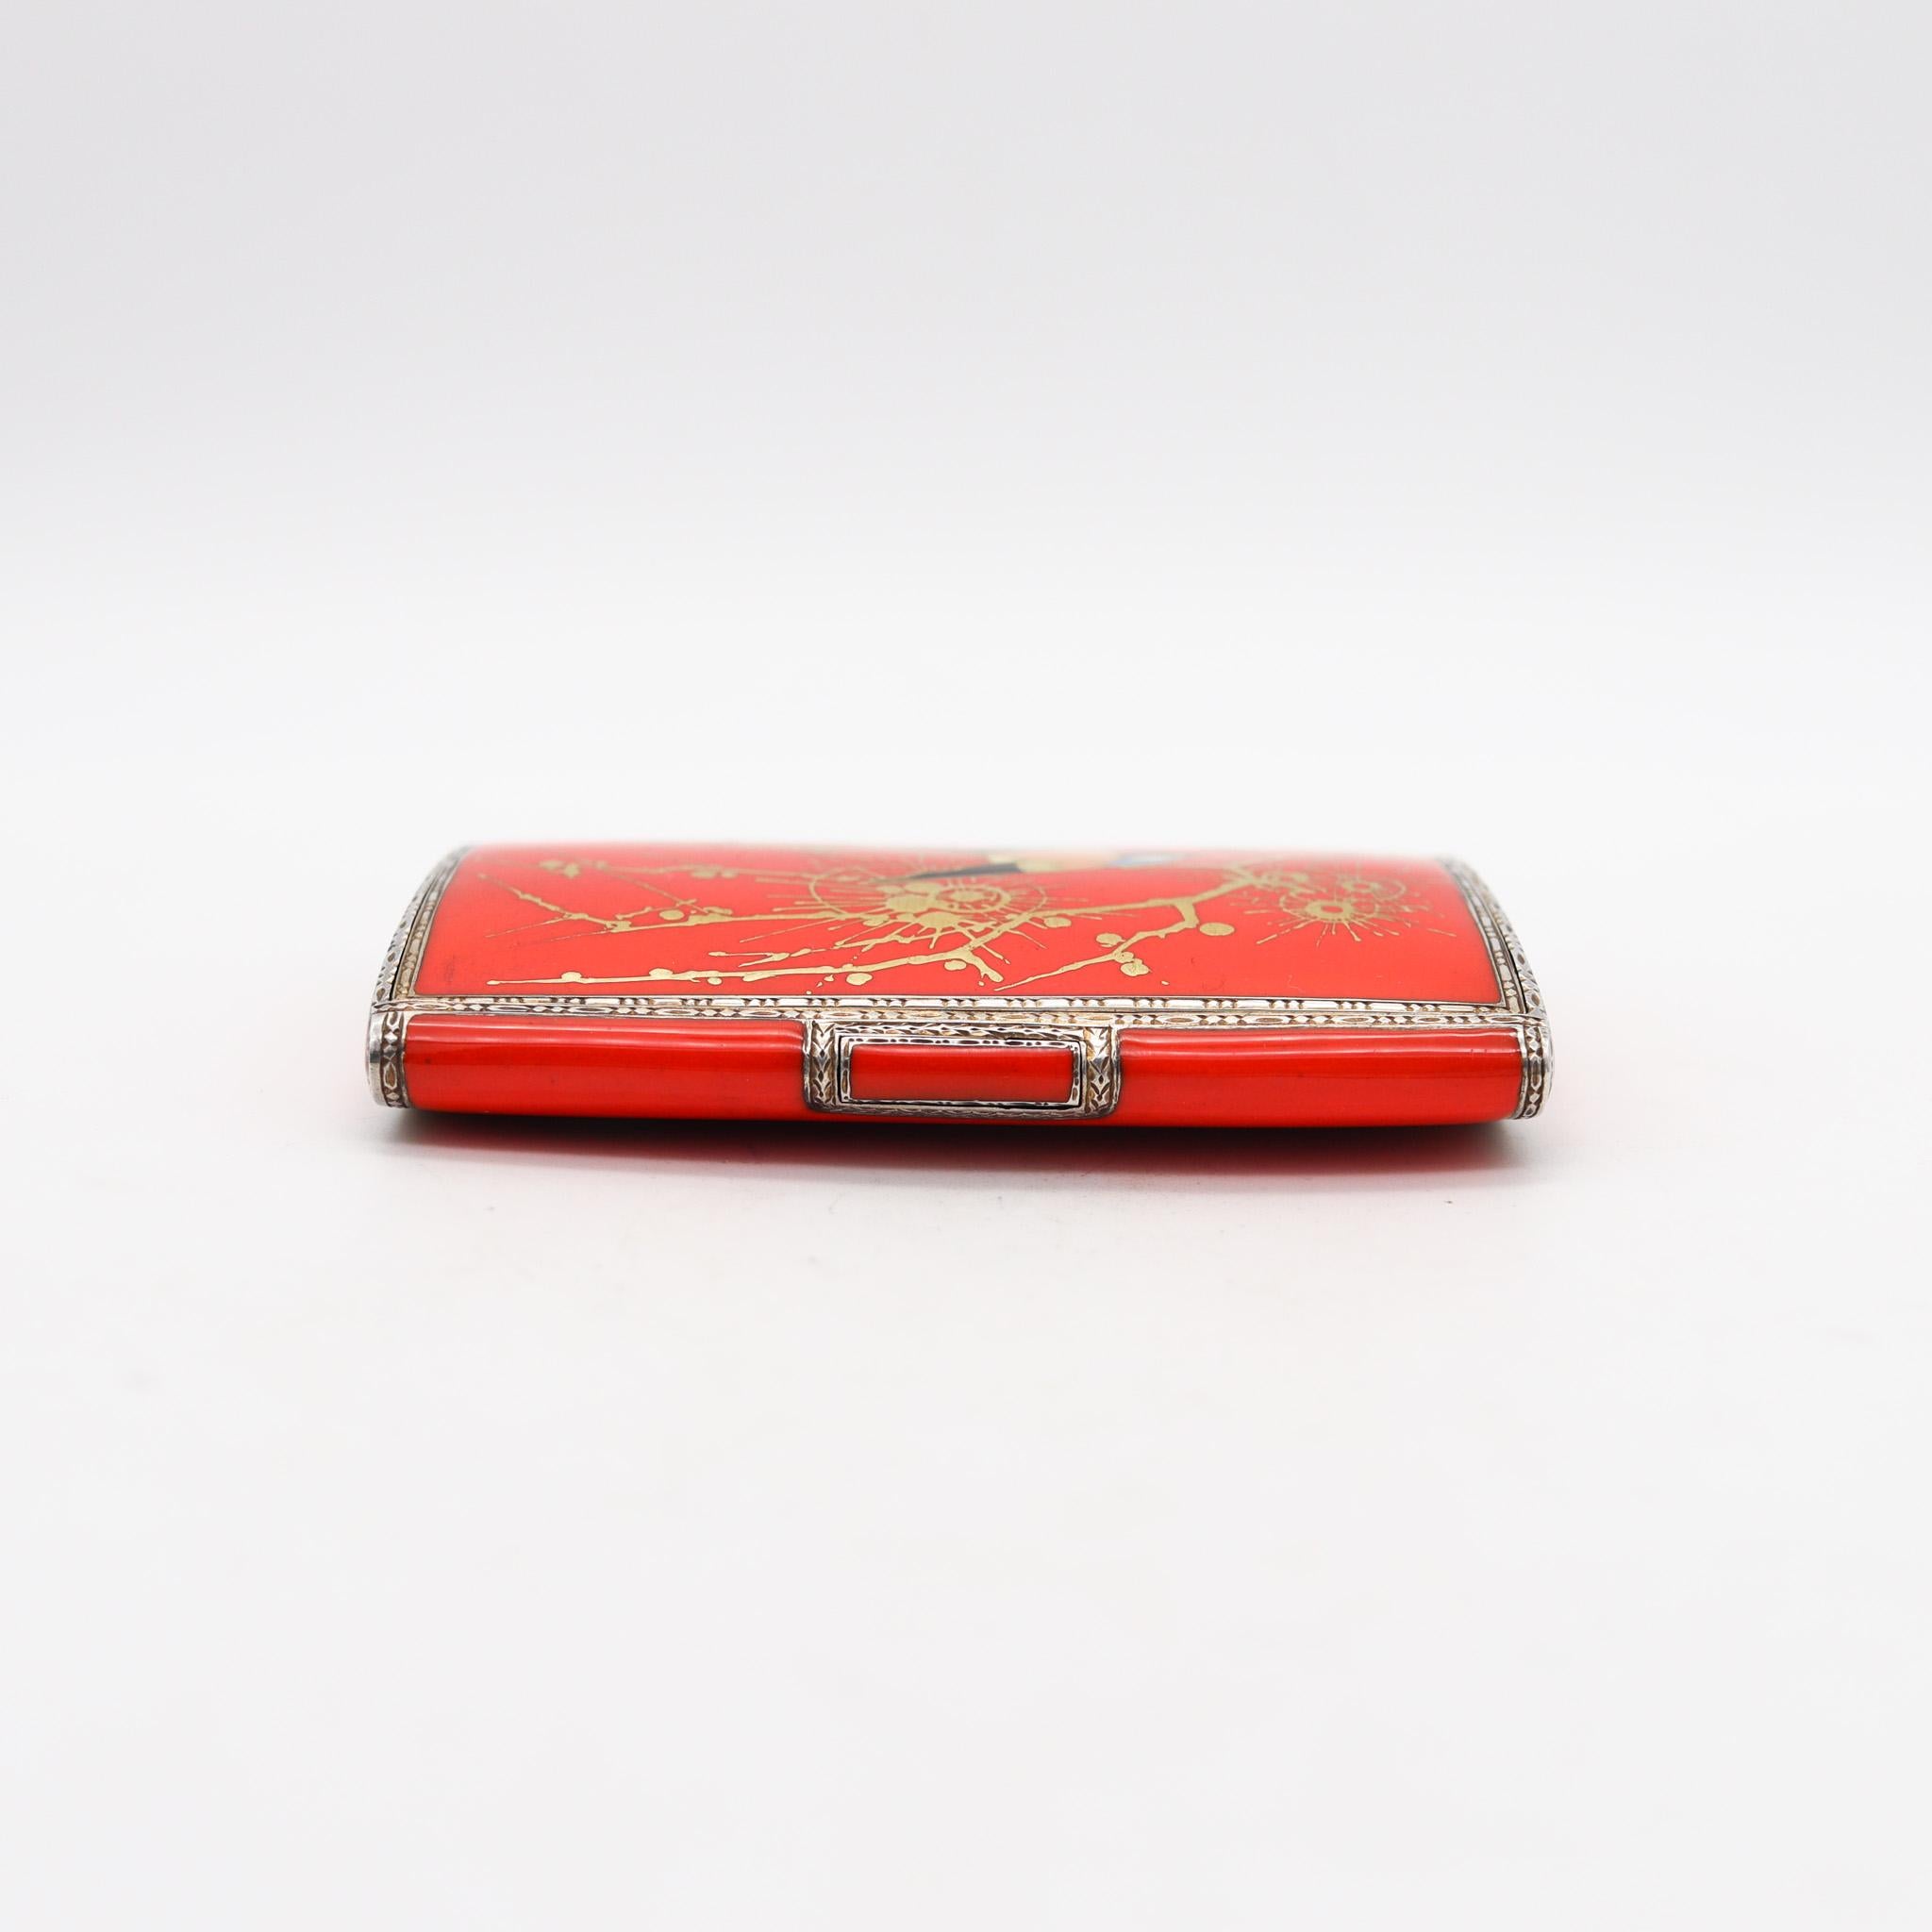 Chinoiserie orange enameled box by Louis Kuppenheim.

Outstanding rare box, created during the art deco period in the city of Pforzheim Germany, back in the late 1930. This wonderful box is closely to mint condition, designed with cushioned shapes